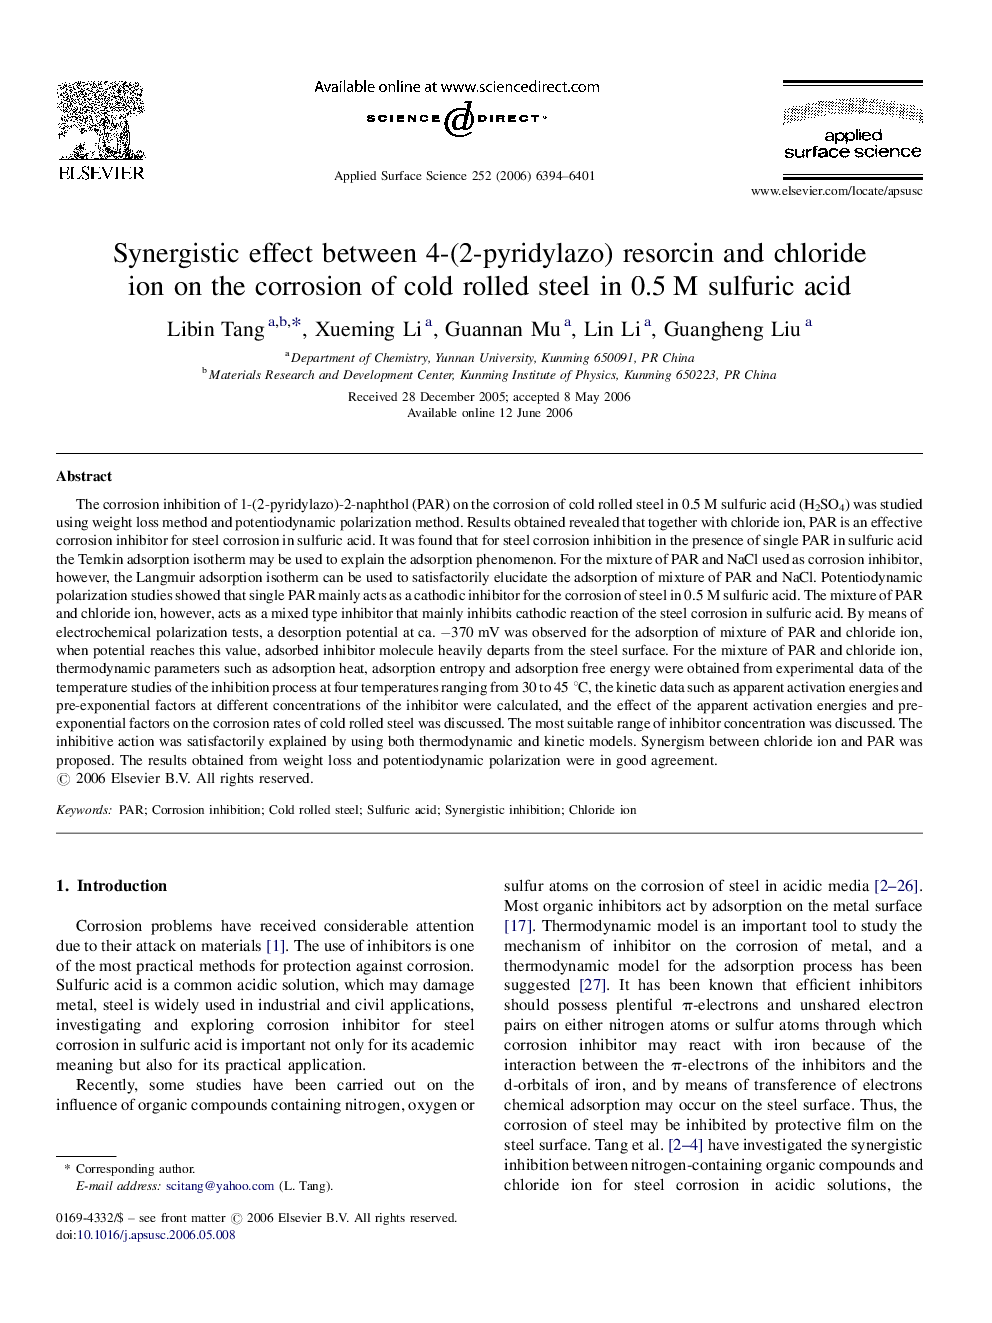 Synergistic effect between 4-(2-pyridylazo) resorcin and chloride ion on the corrosion of cold rolled steel in 0.5 M sulfuric acid